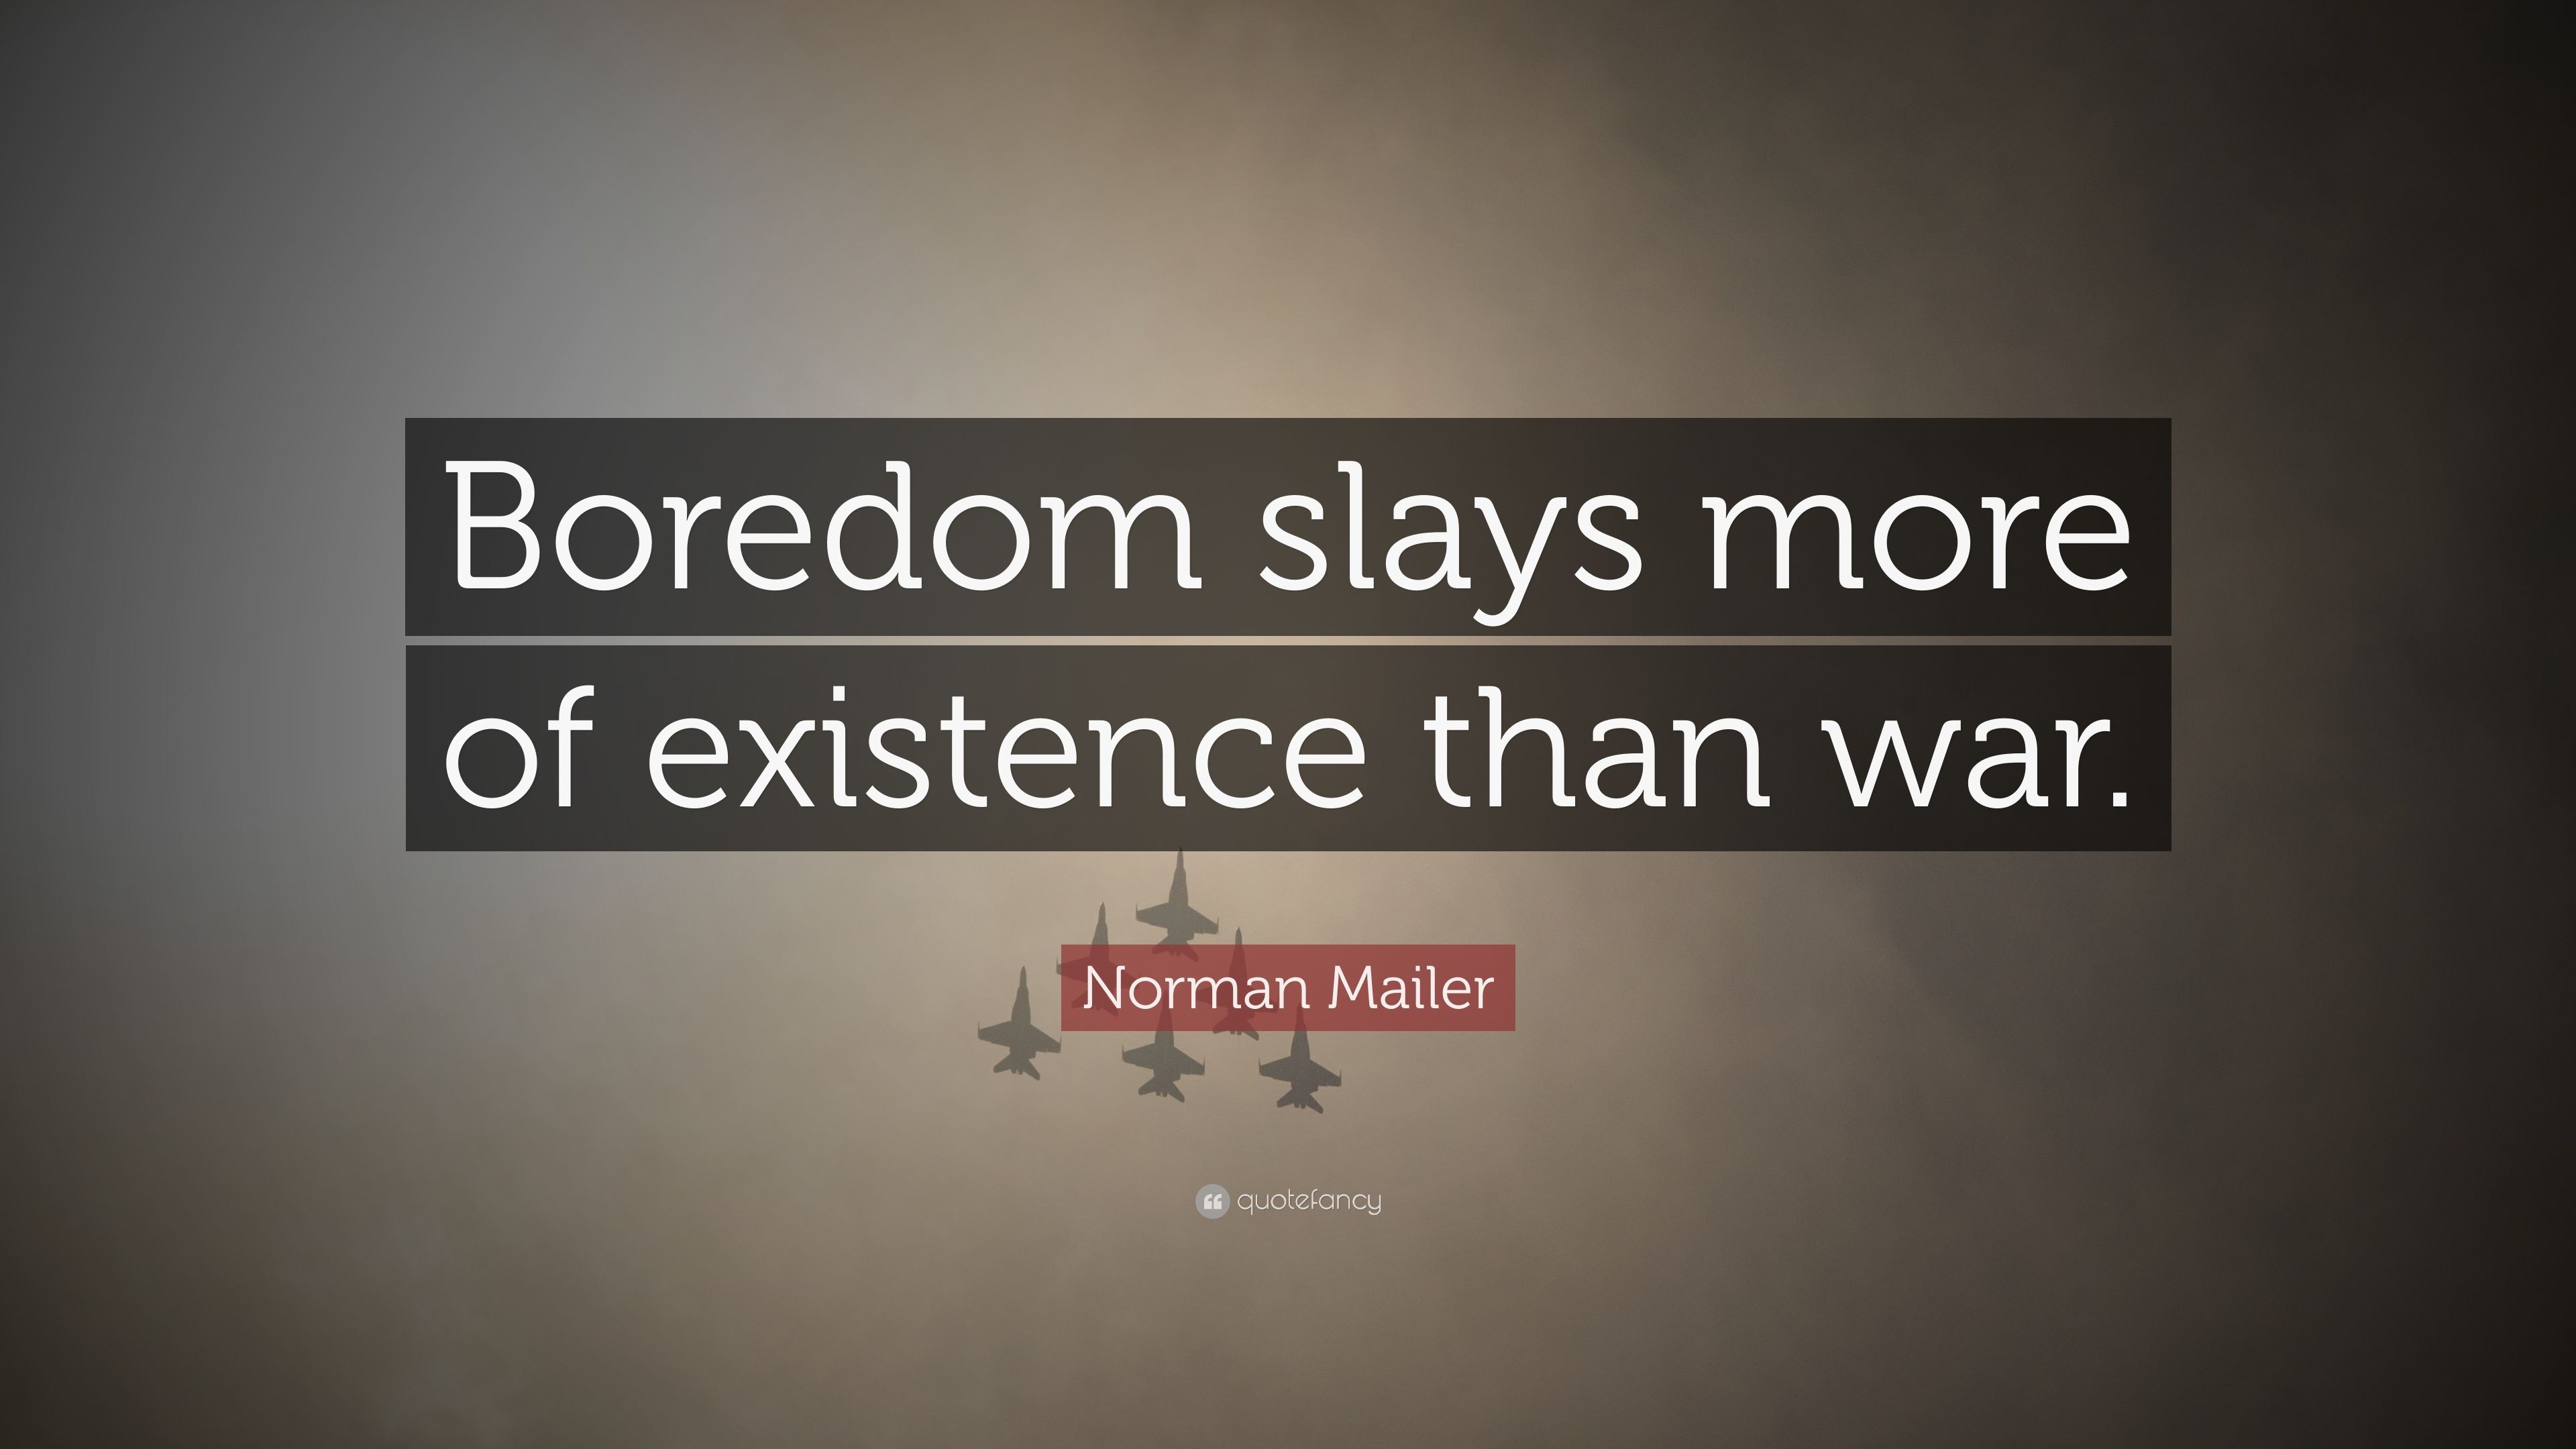 Norman Mailer Quote: “Boredom slays more of existence than war.” (6 wallpaper)